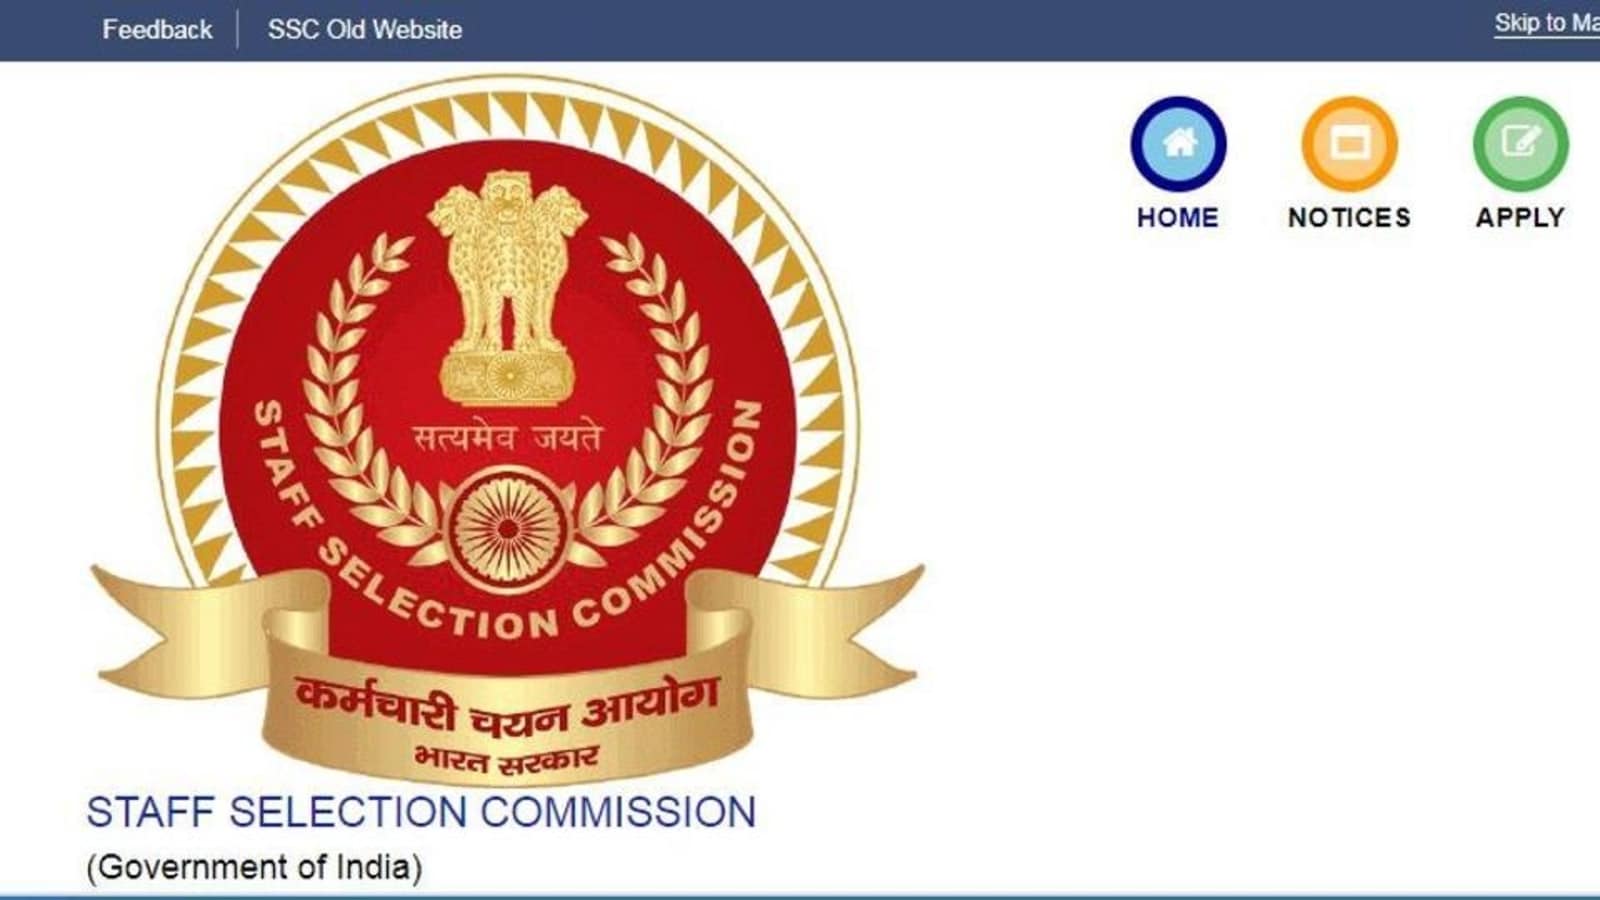 SSC CLG 2021 (Tier-II) exam result out at ssc.nic.in, direct link here